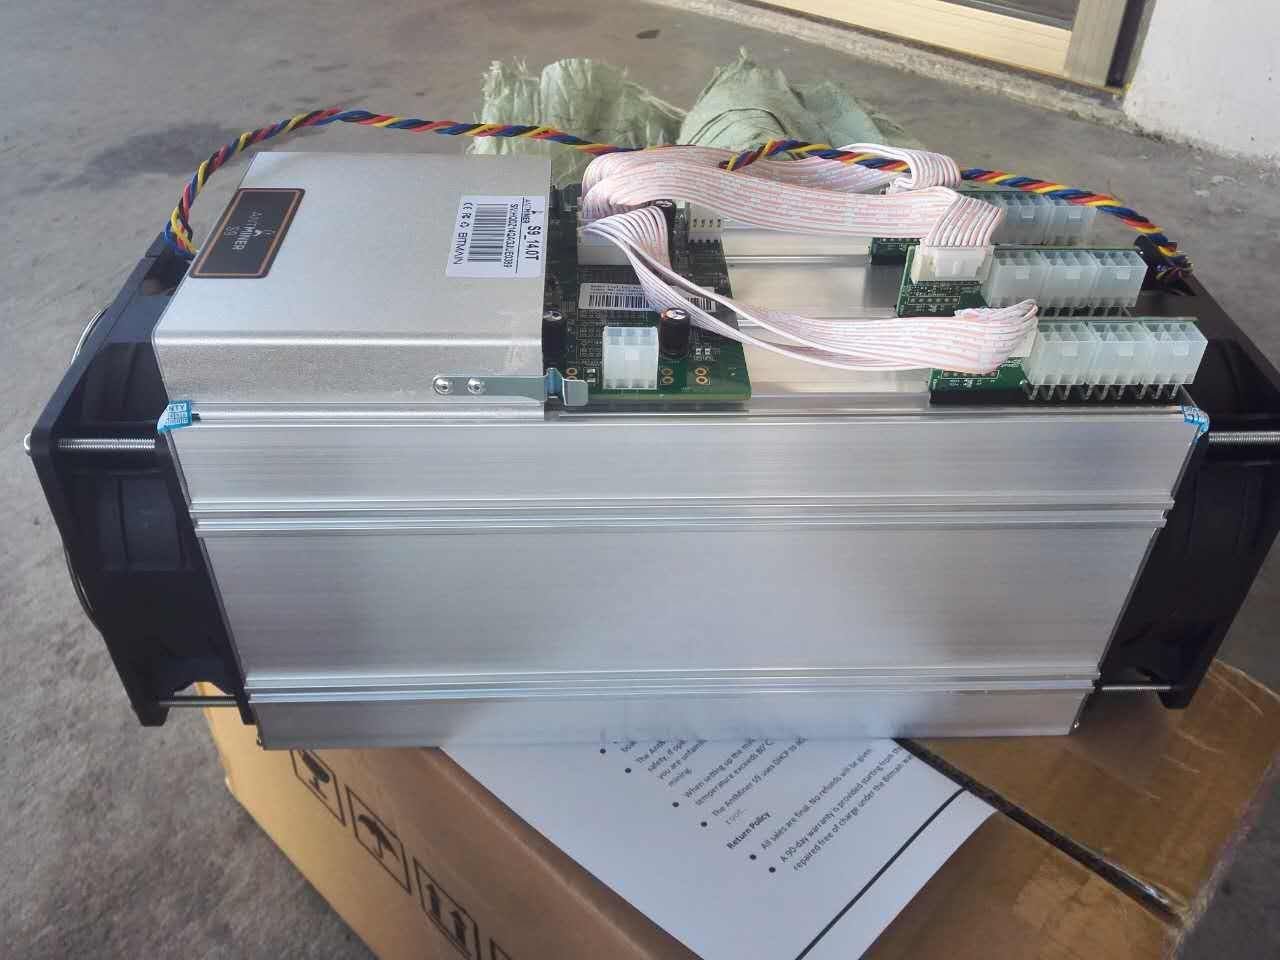 Antminer S9 135THs 098WGH 16nm ASIC Bitcoin Miner